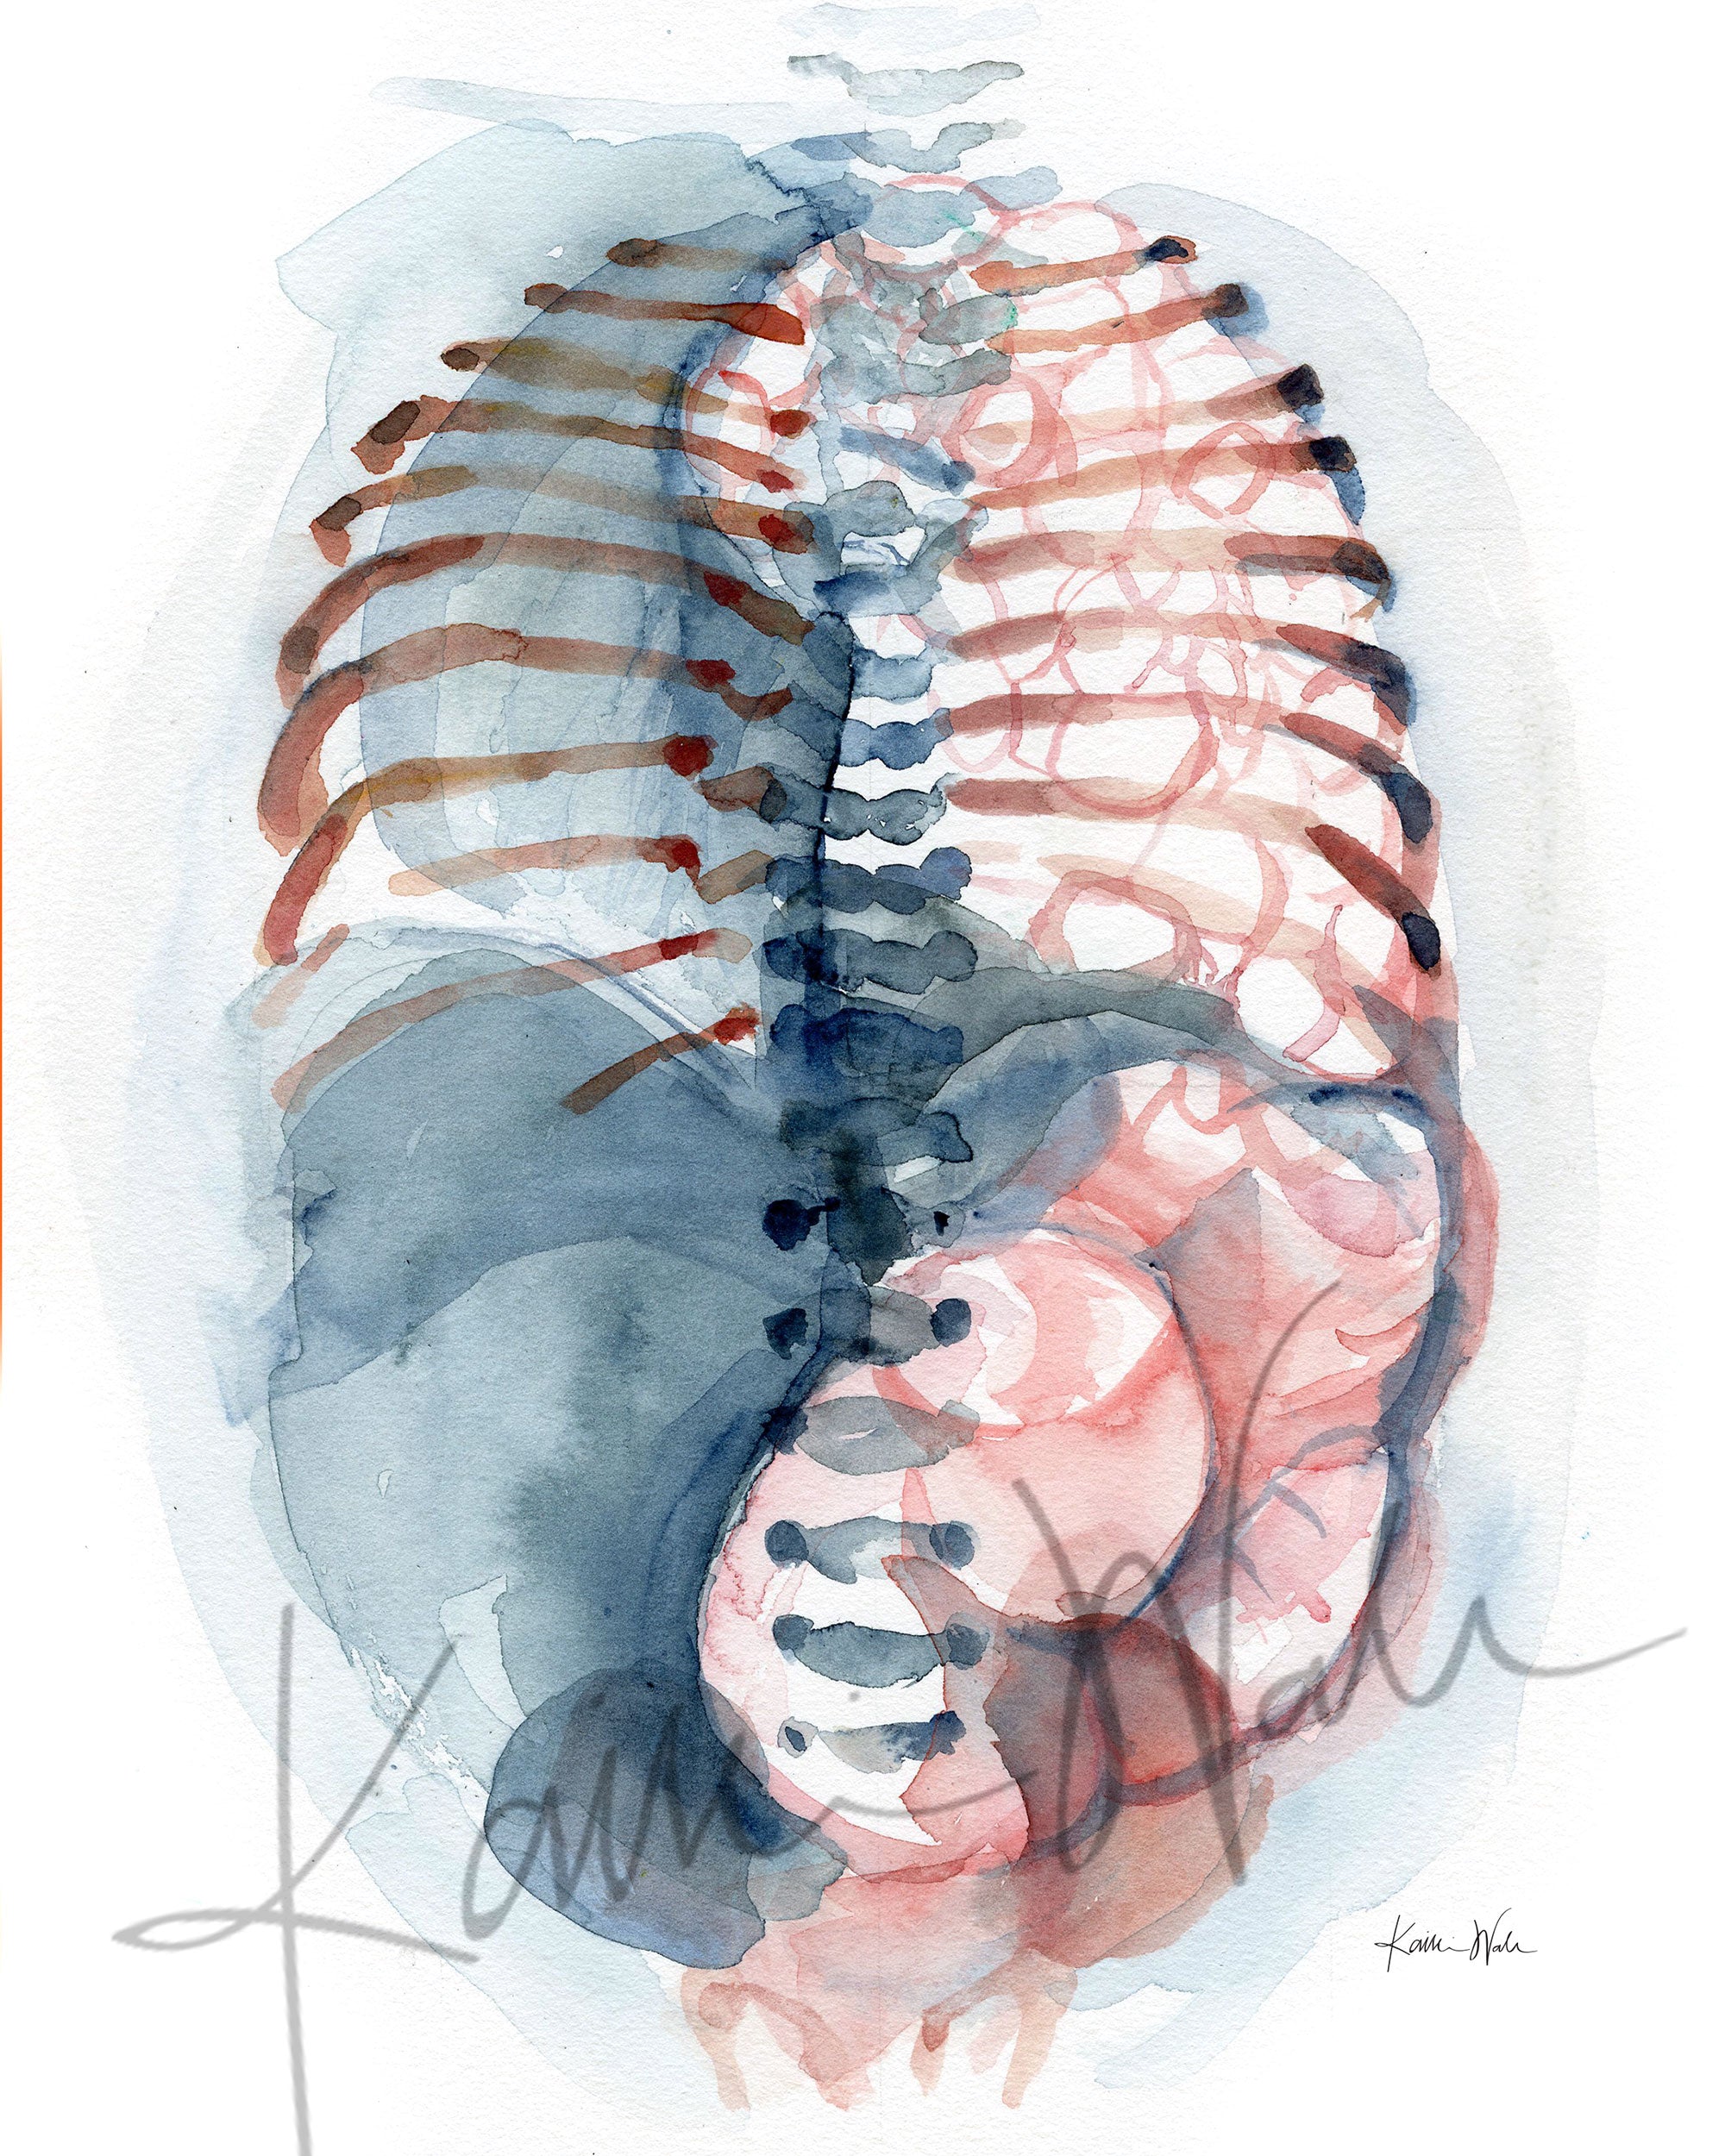 Unframed watercolor painting of a diaphragmatic hernia.